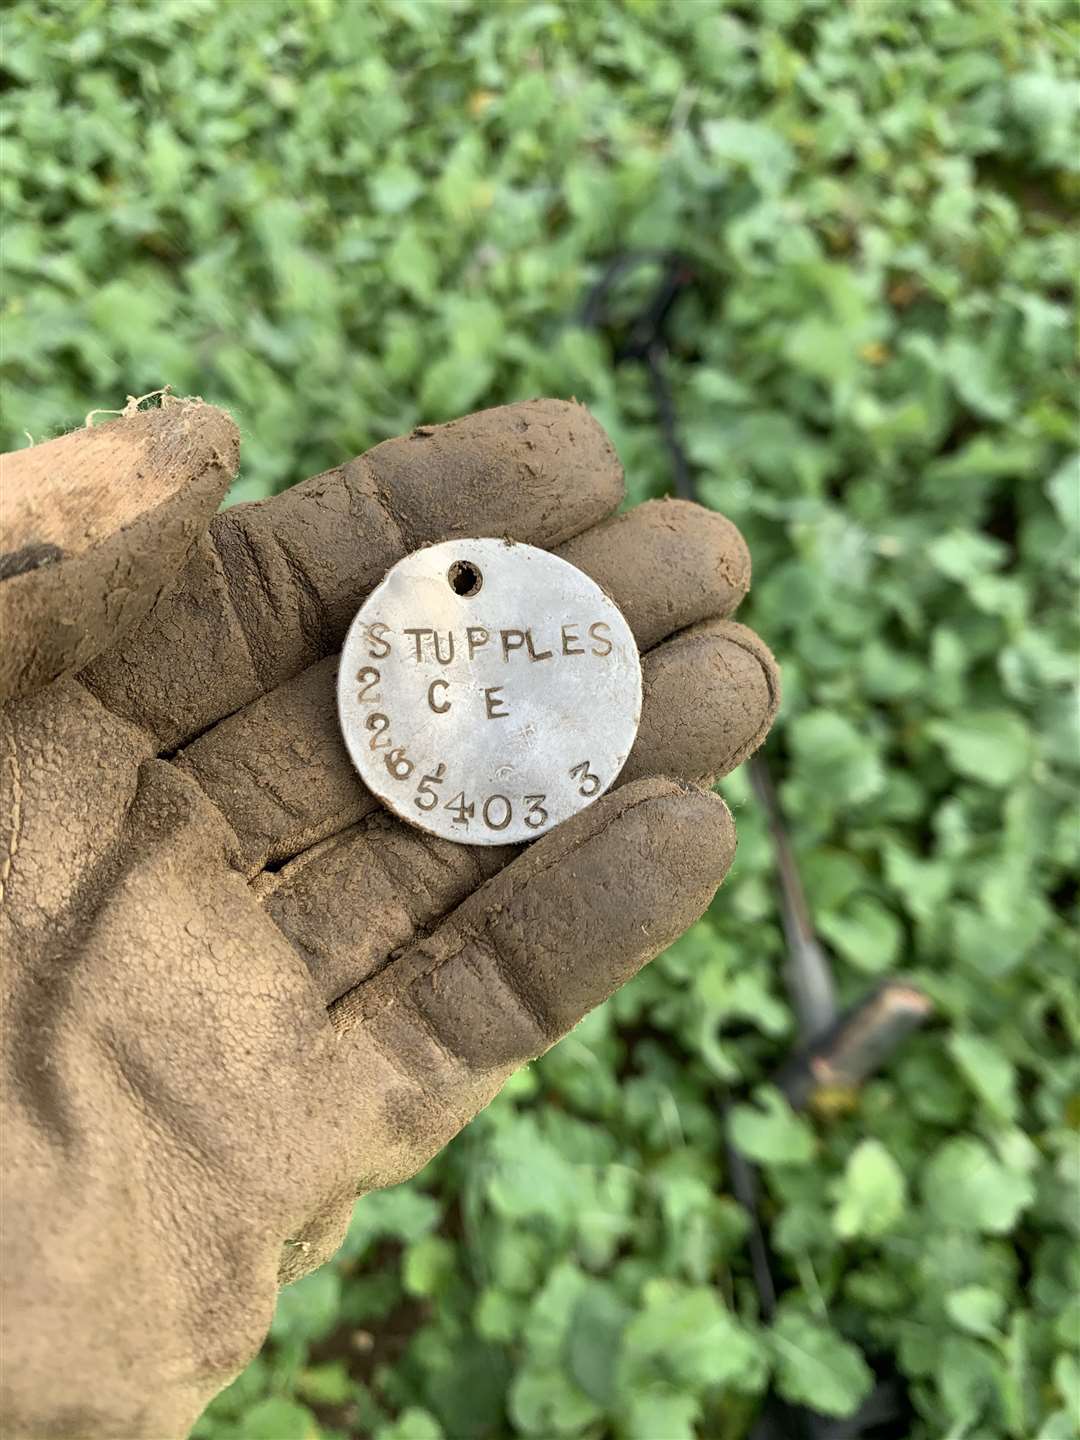 Emma Pierce's XP Deus metal detector found this military dog tag under a cabbage leaf in a field in Shepherdswell